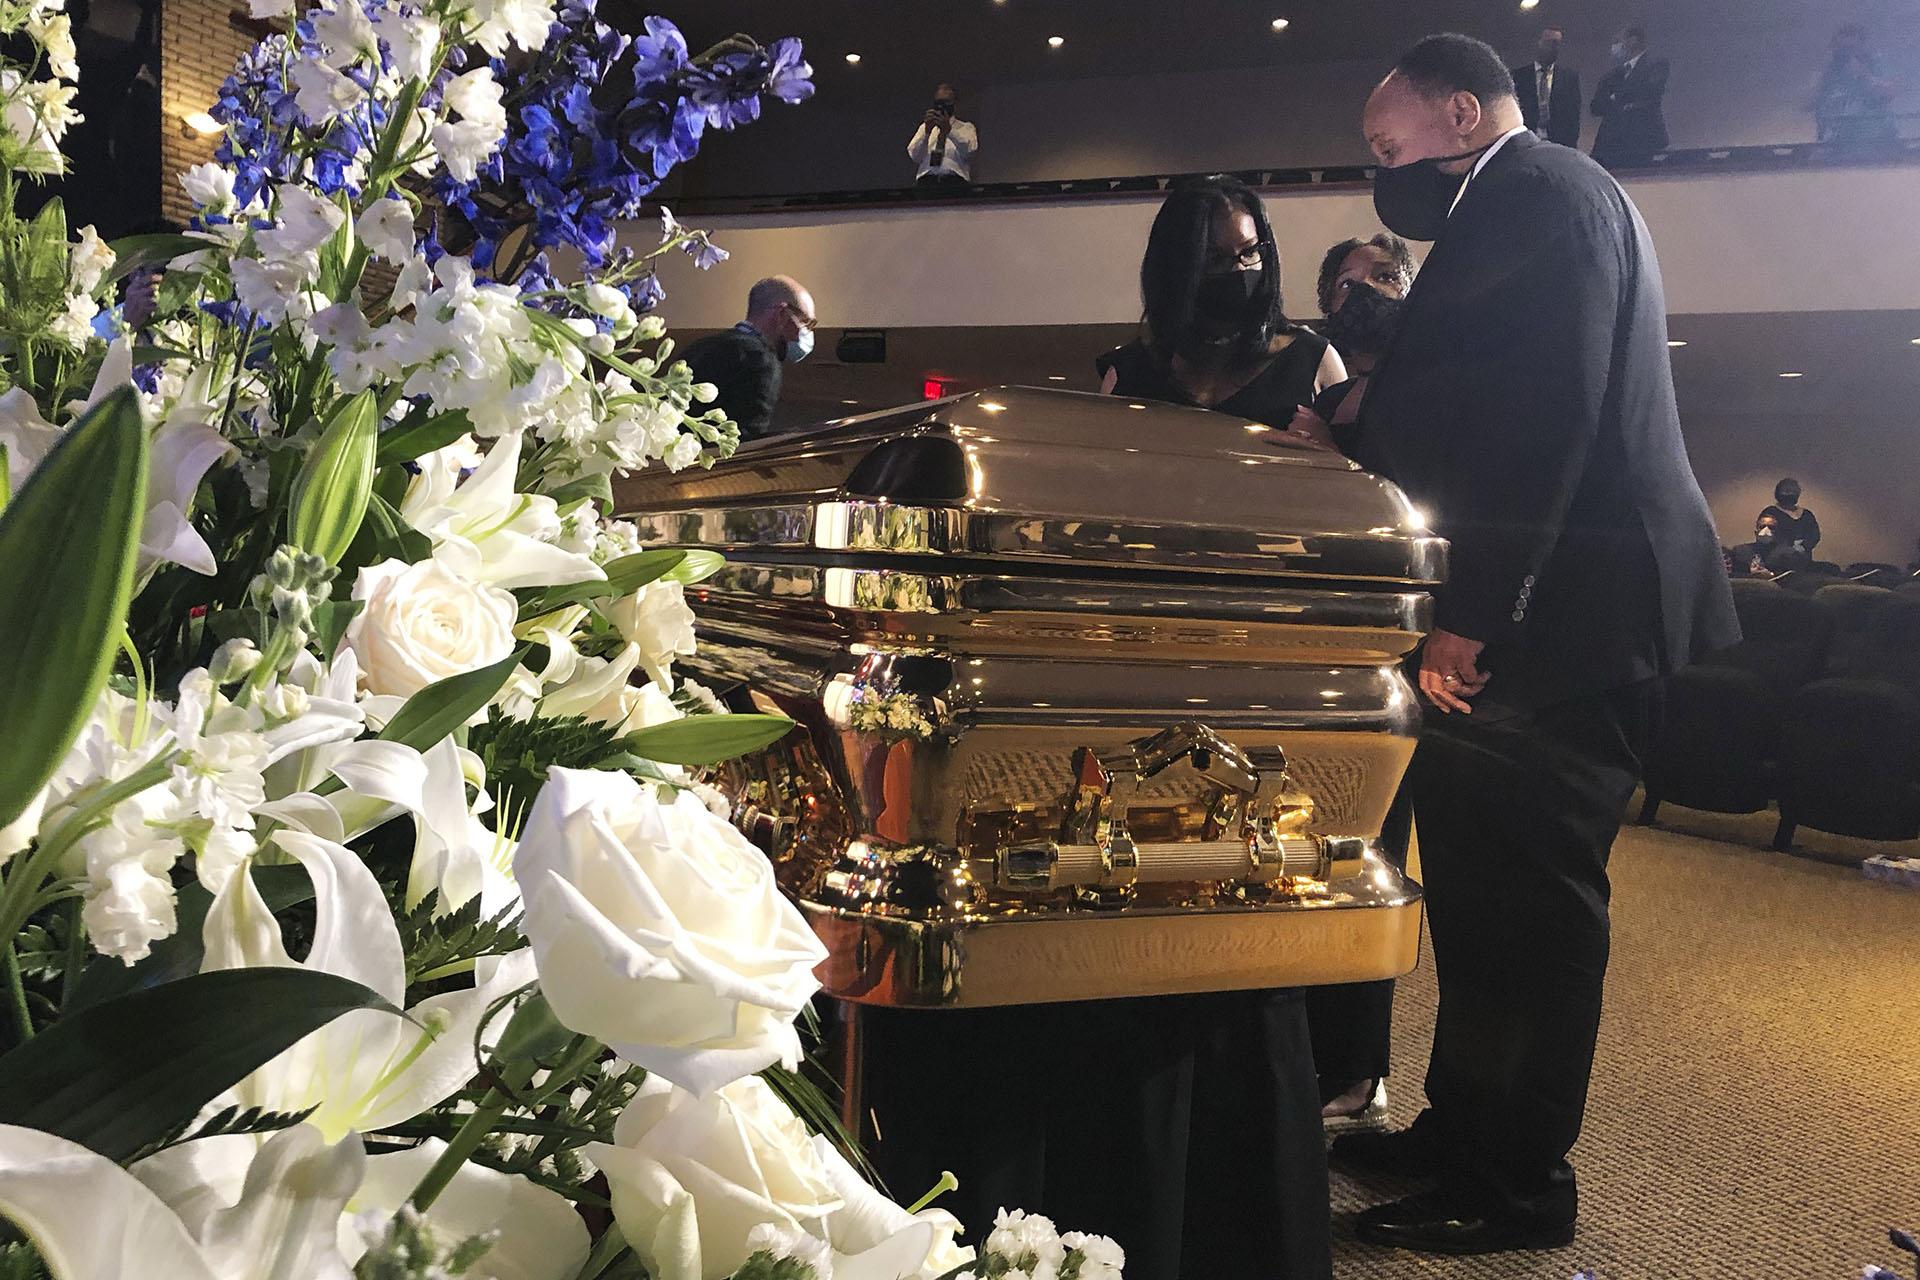 Martin Luther King III takes a moment by George Floyd’s casket Thursday, June 4, 2020, before a memorial service for George Floyd in Minneapolis. (AP Photo / Bebeto Matthews)